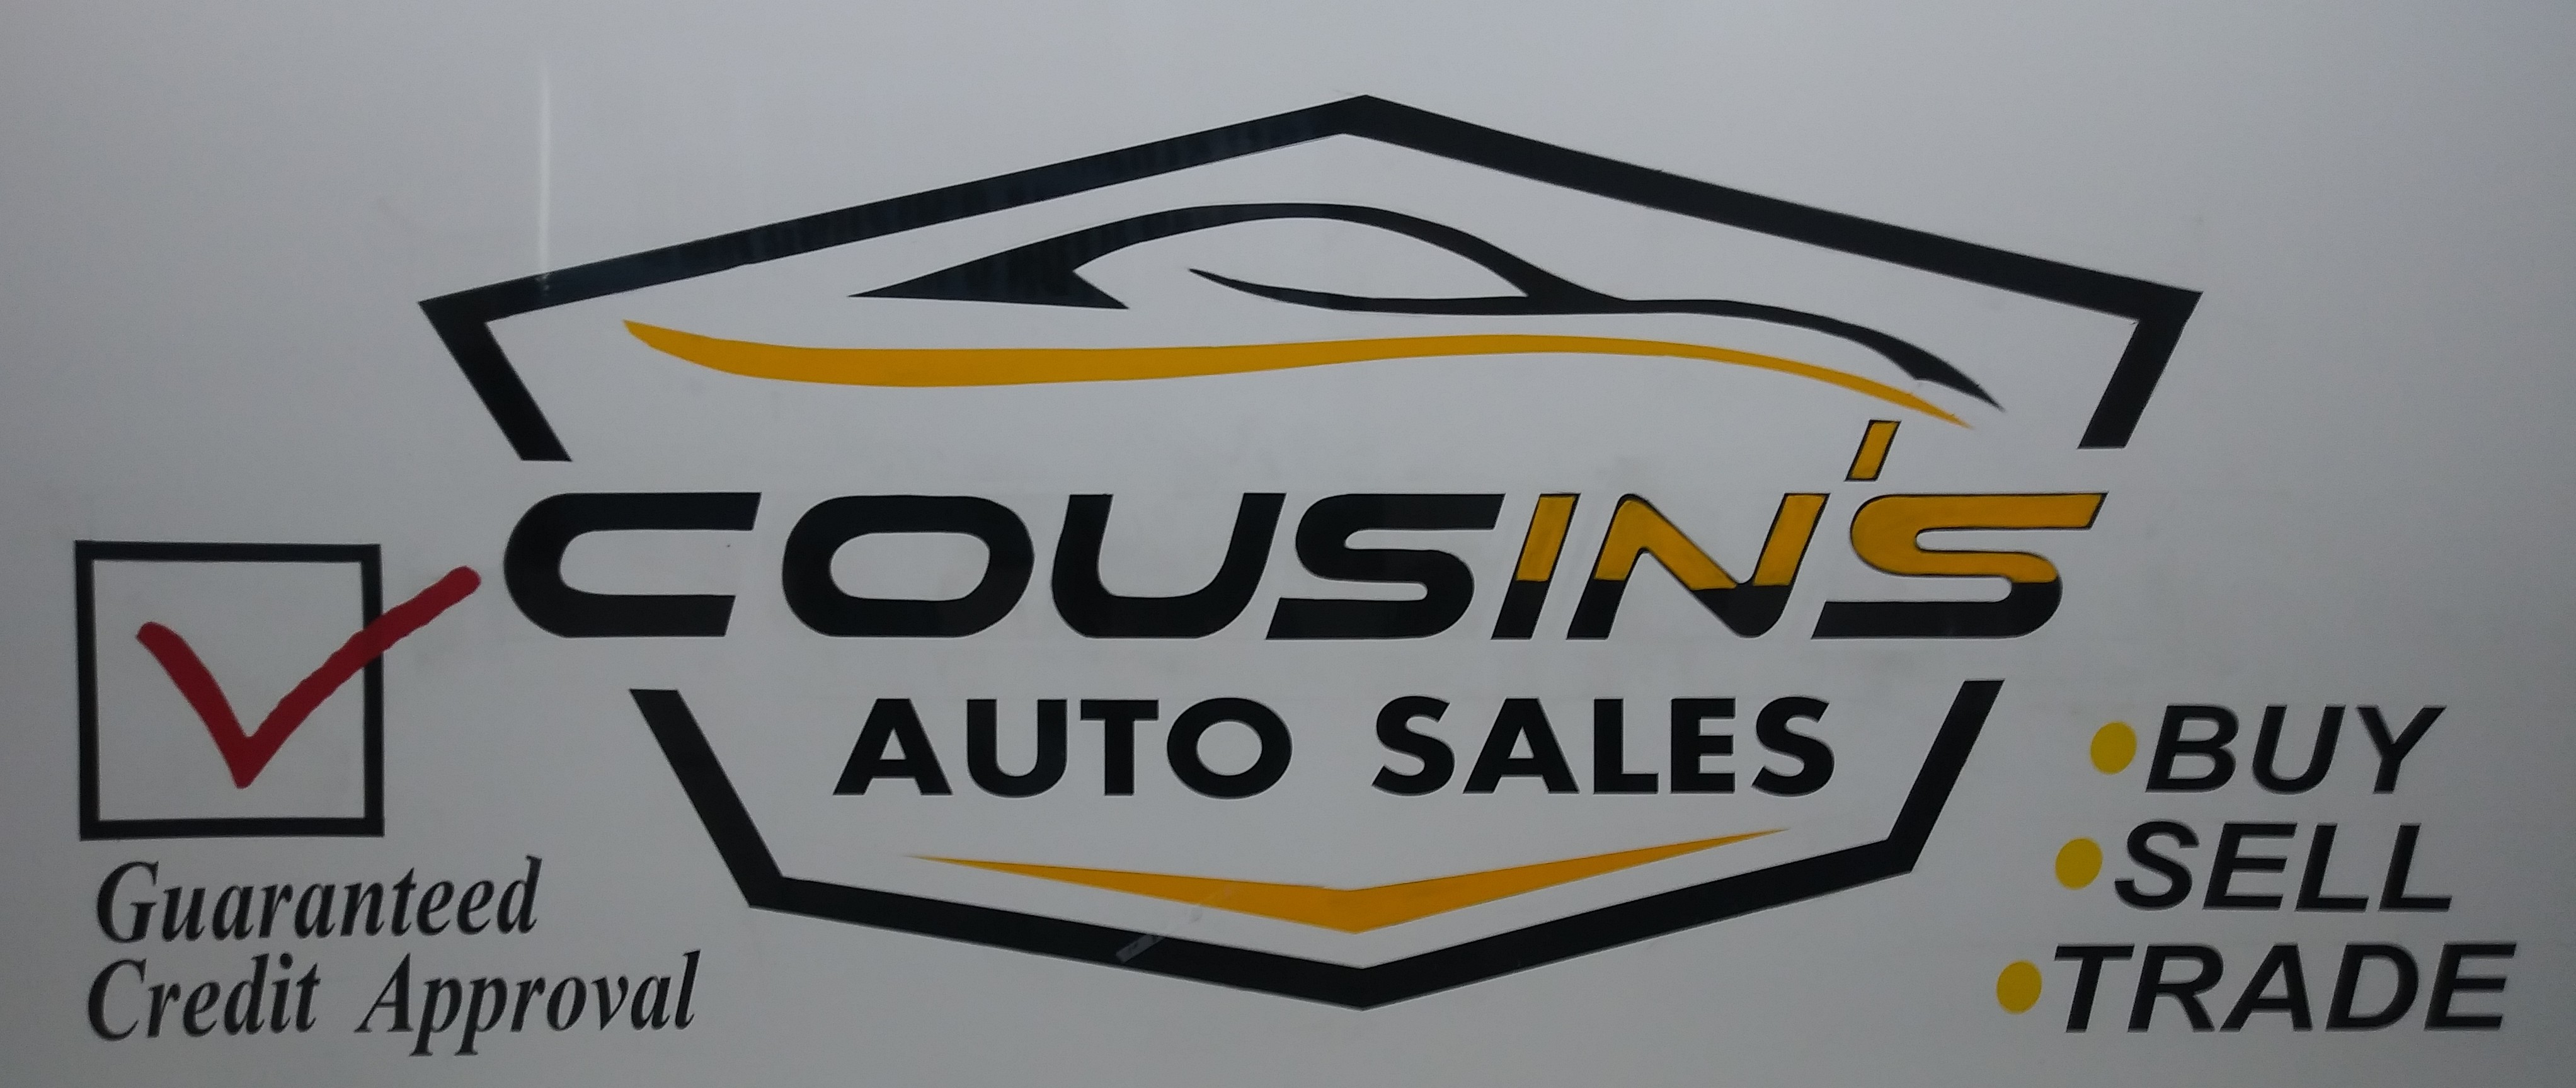 Cousin's Auto Sales 4790 Airway Rd, Dayton, OH 45431 - superpages.com